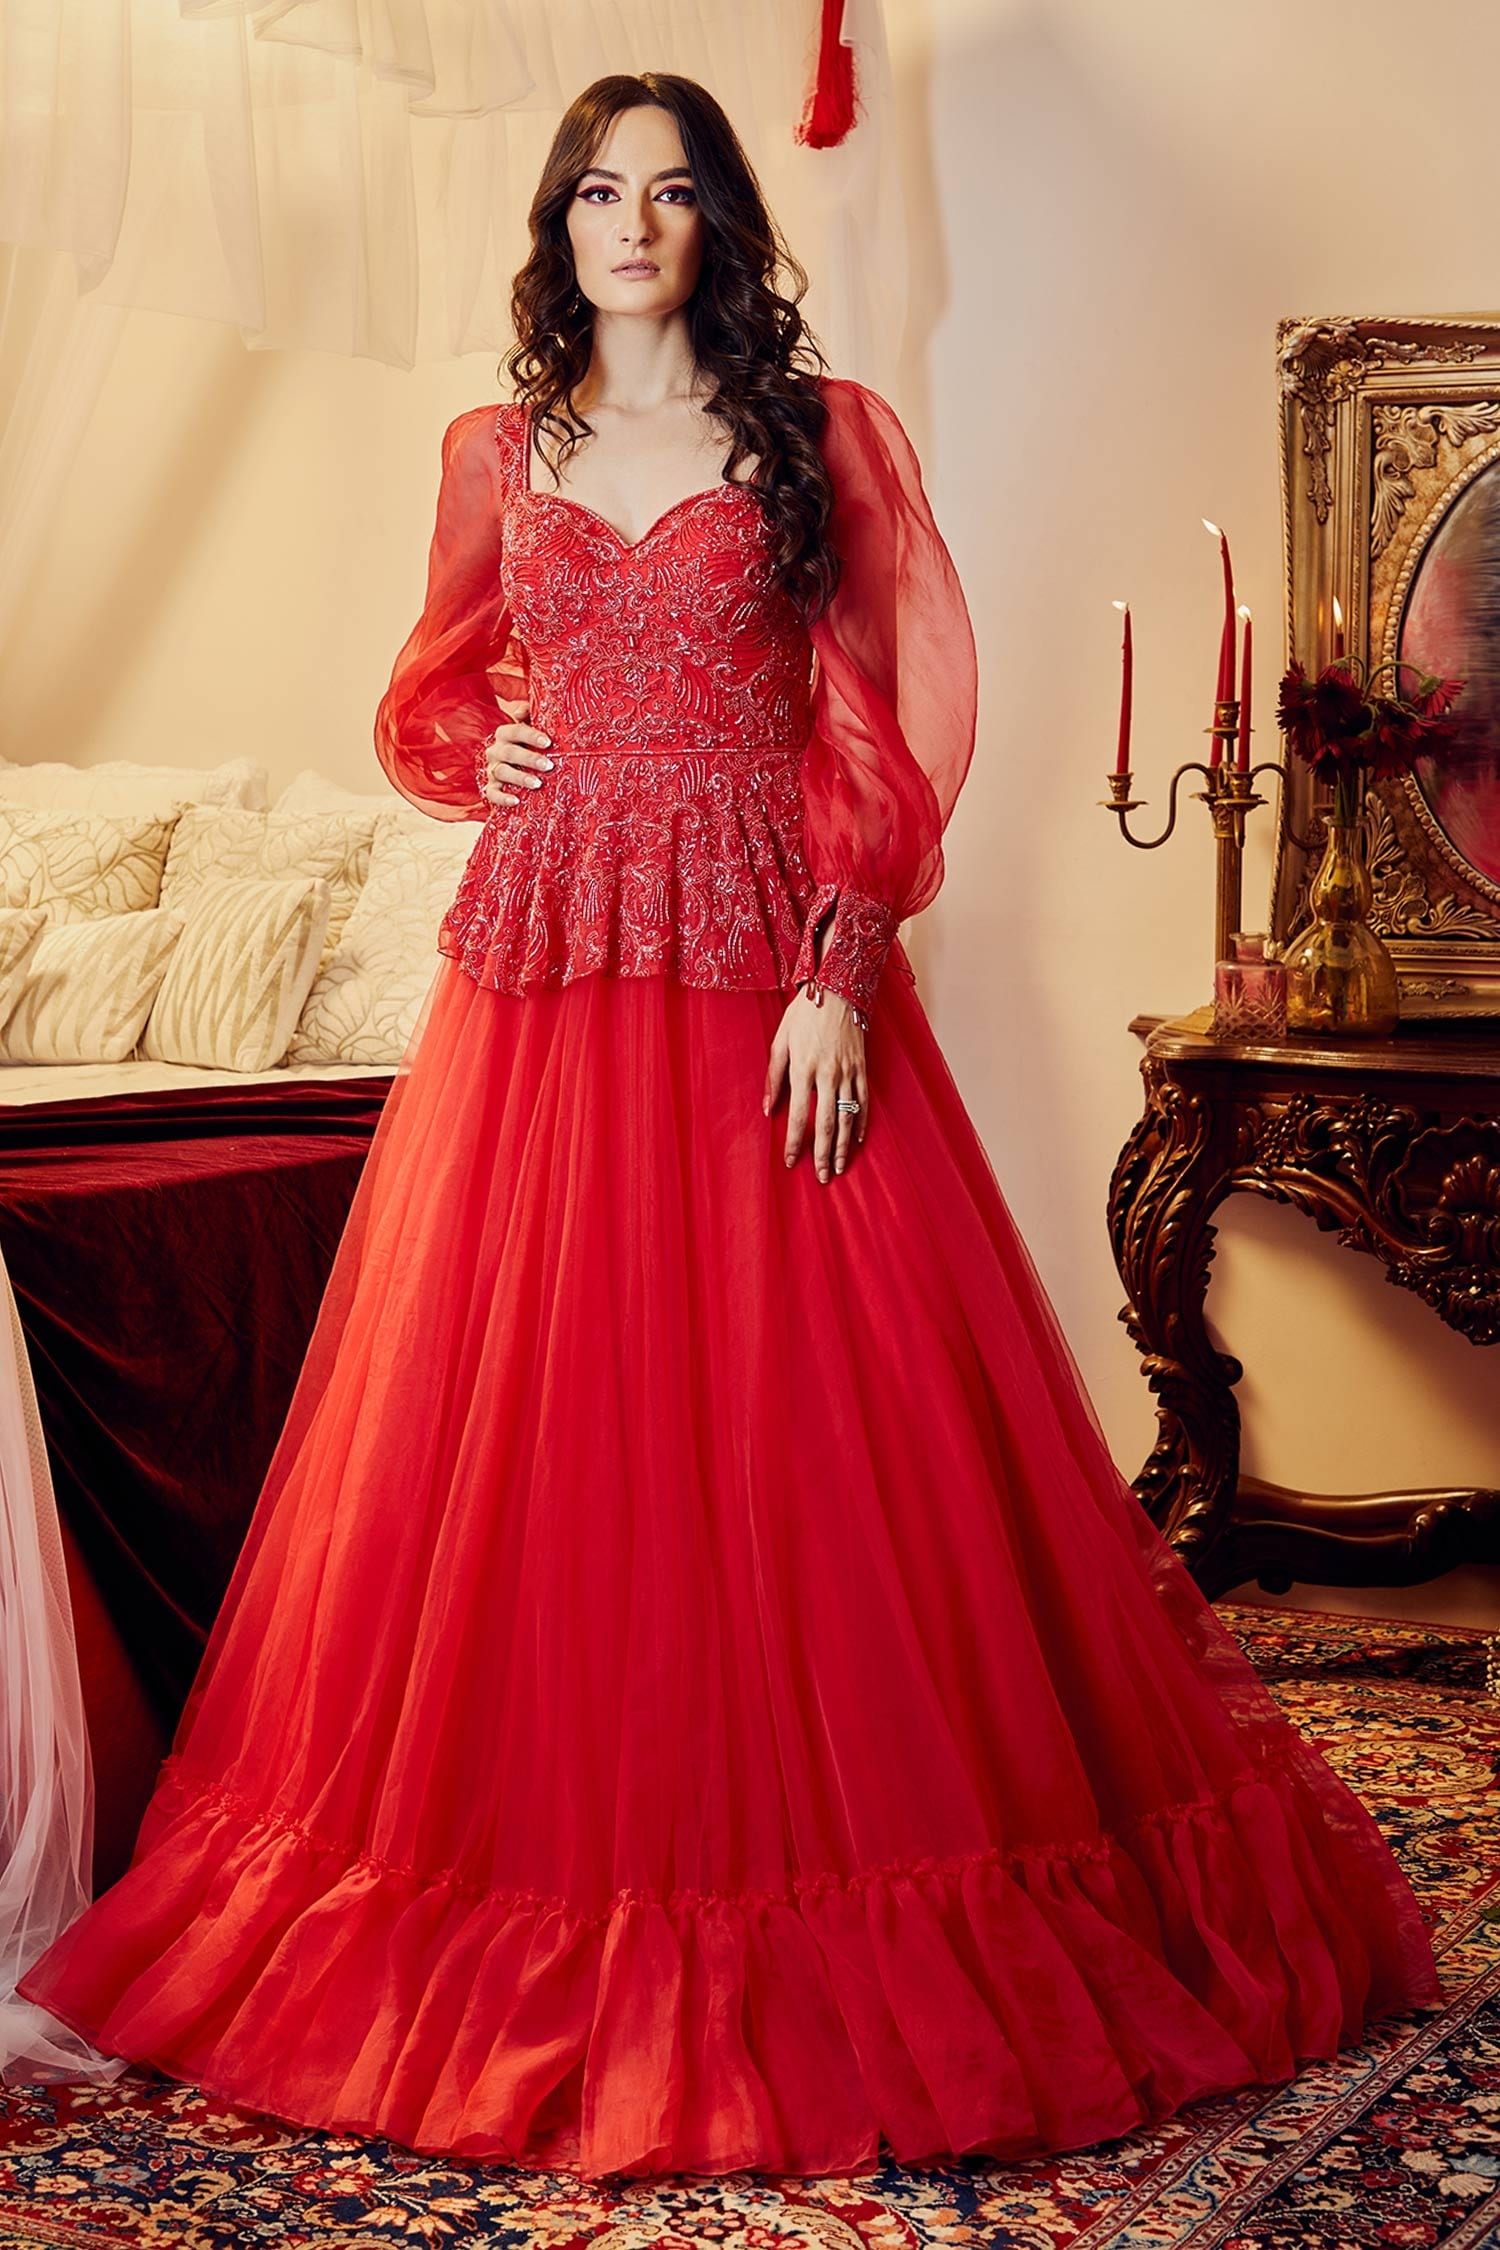 red gown dress